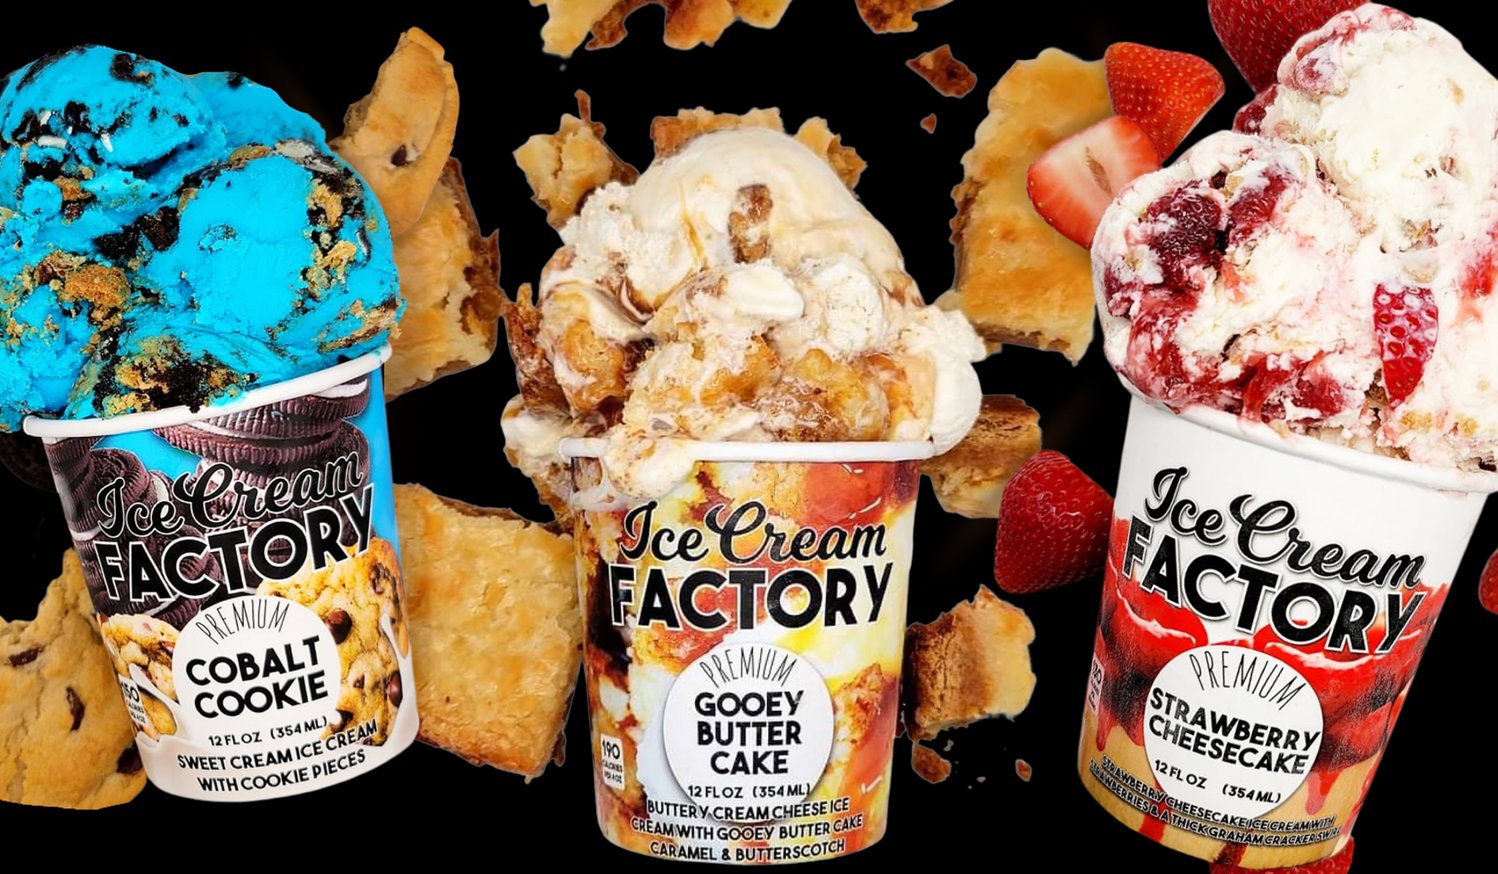 The company produces flavors such as Cobalt Cookie, Gooey Butter Cake and Strawberry Cheesecake.